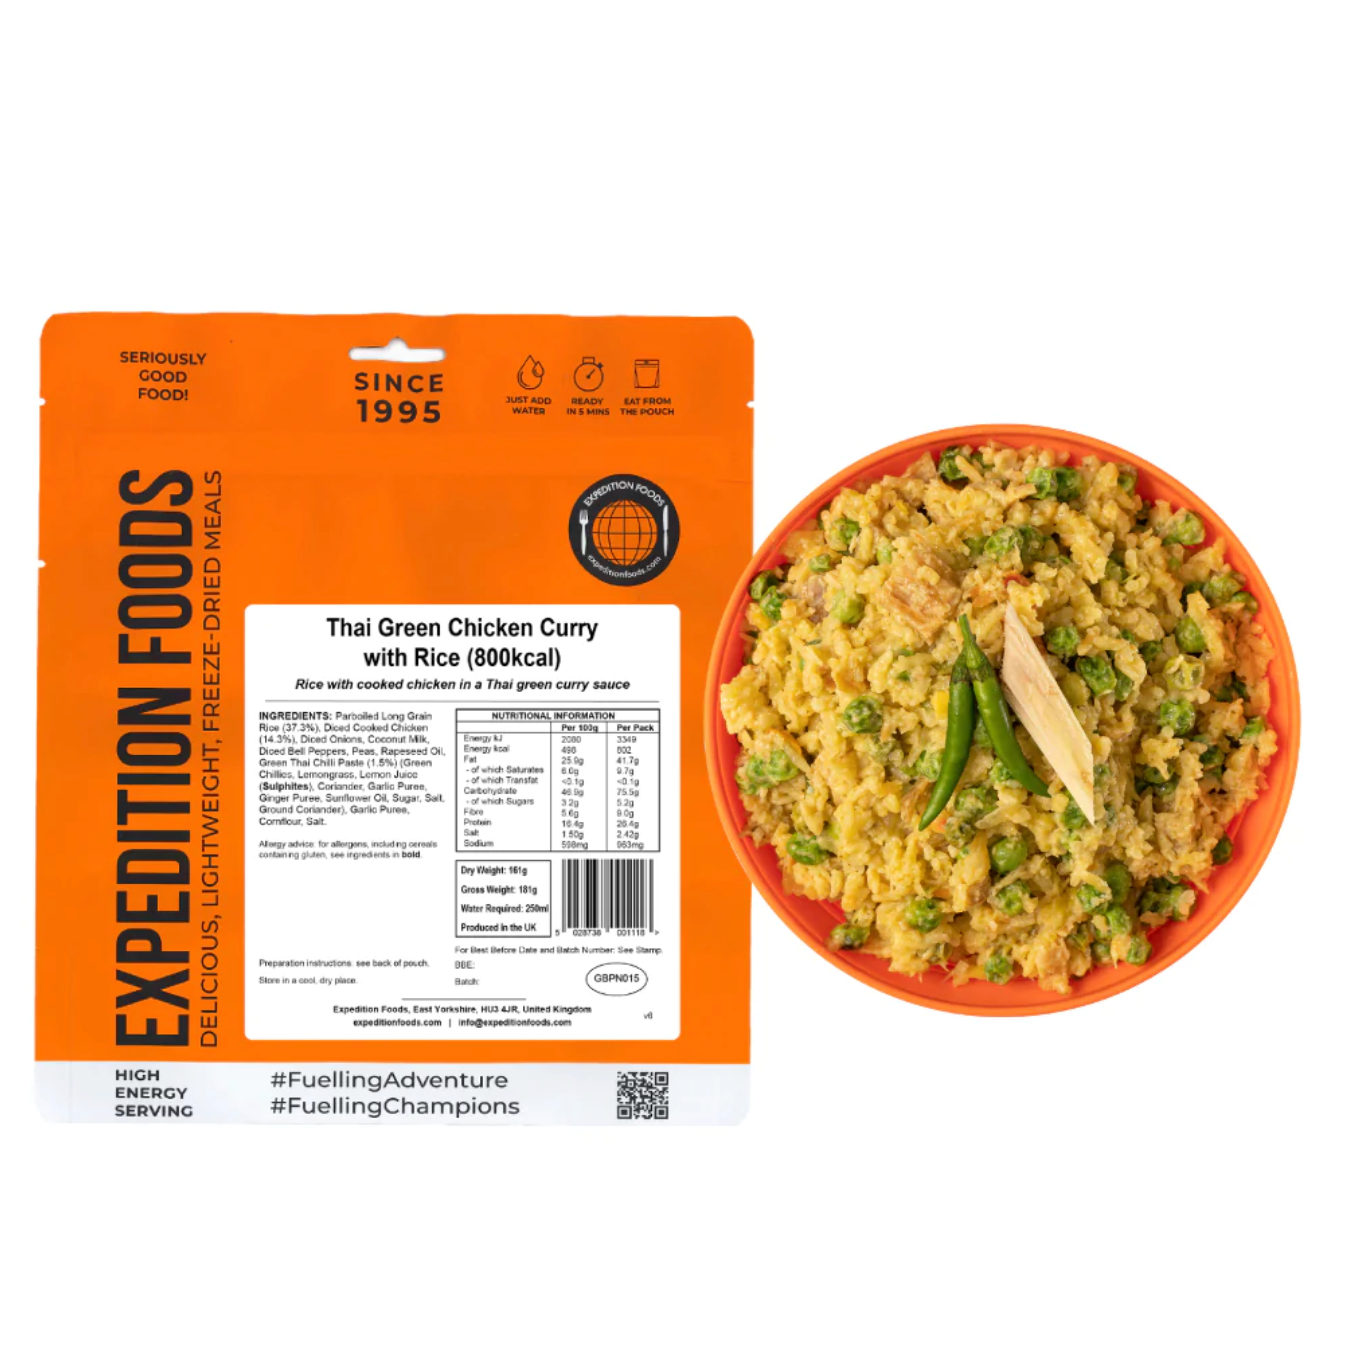 Expedition Foods Thai Green Chicken Curry with Rice 800KCAL